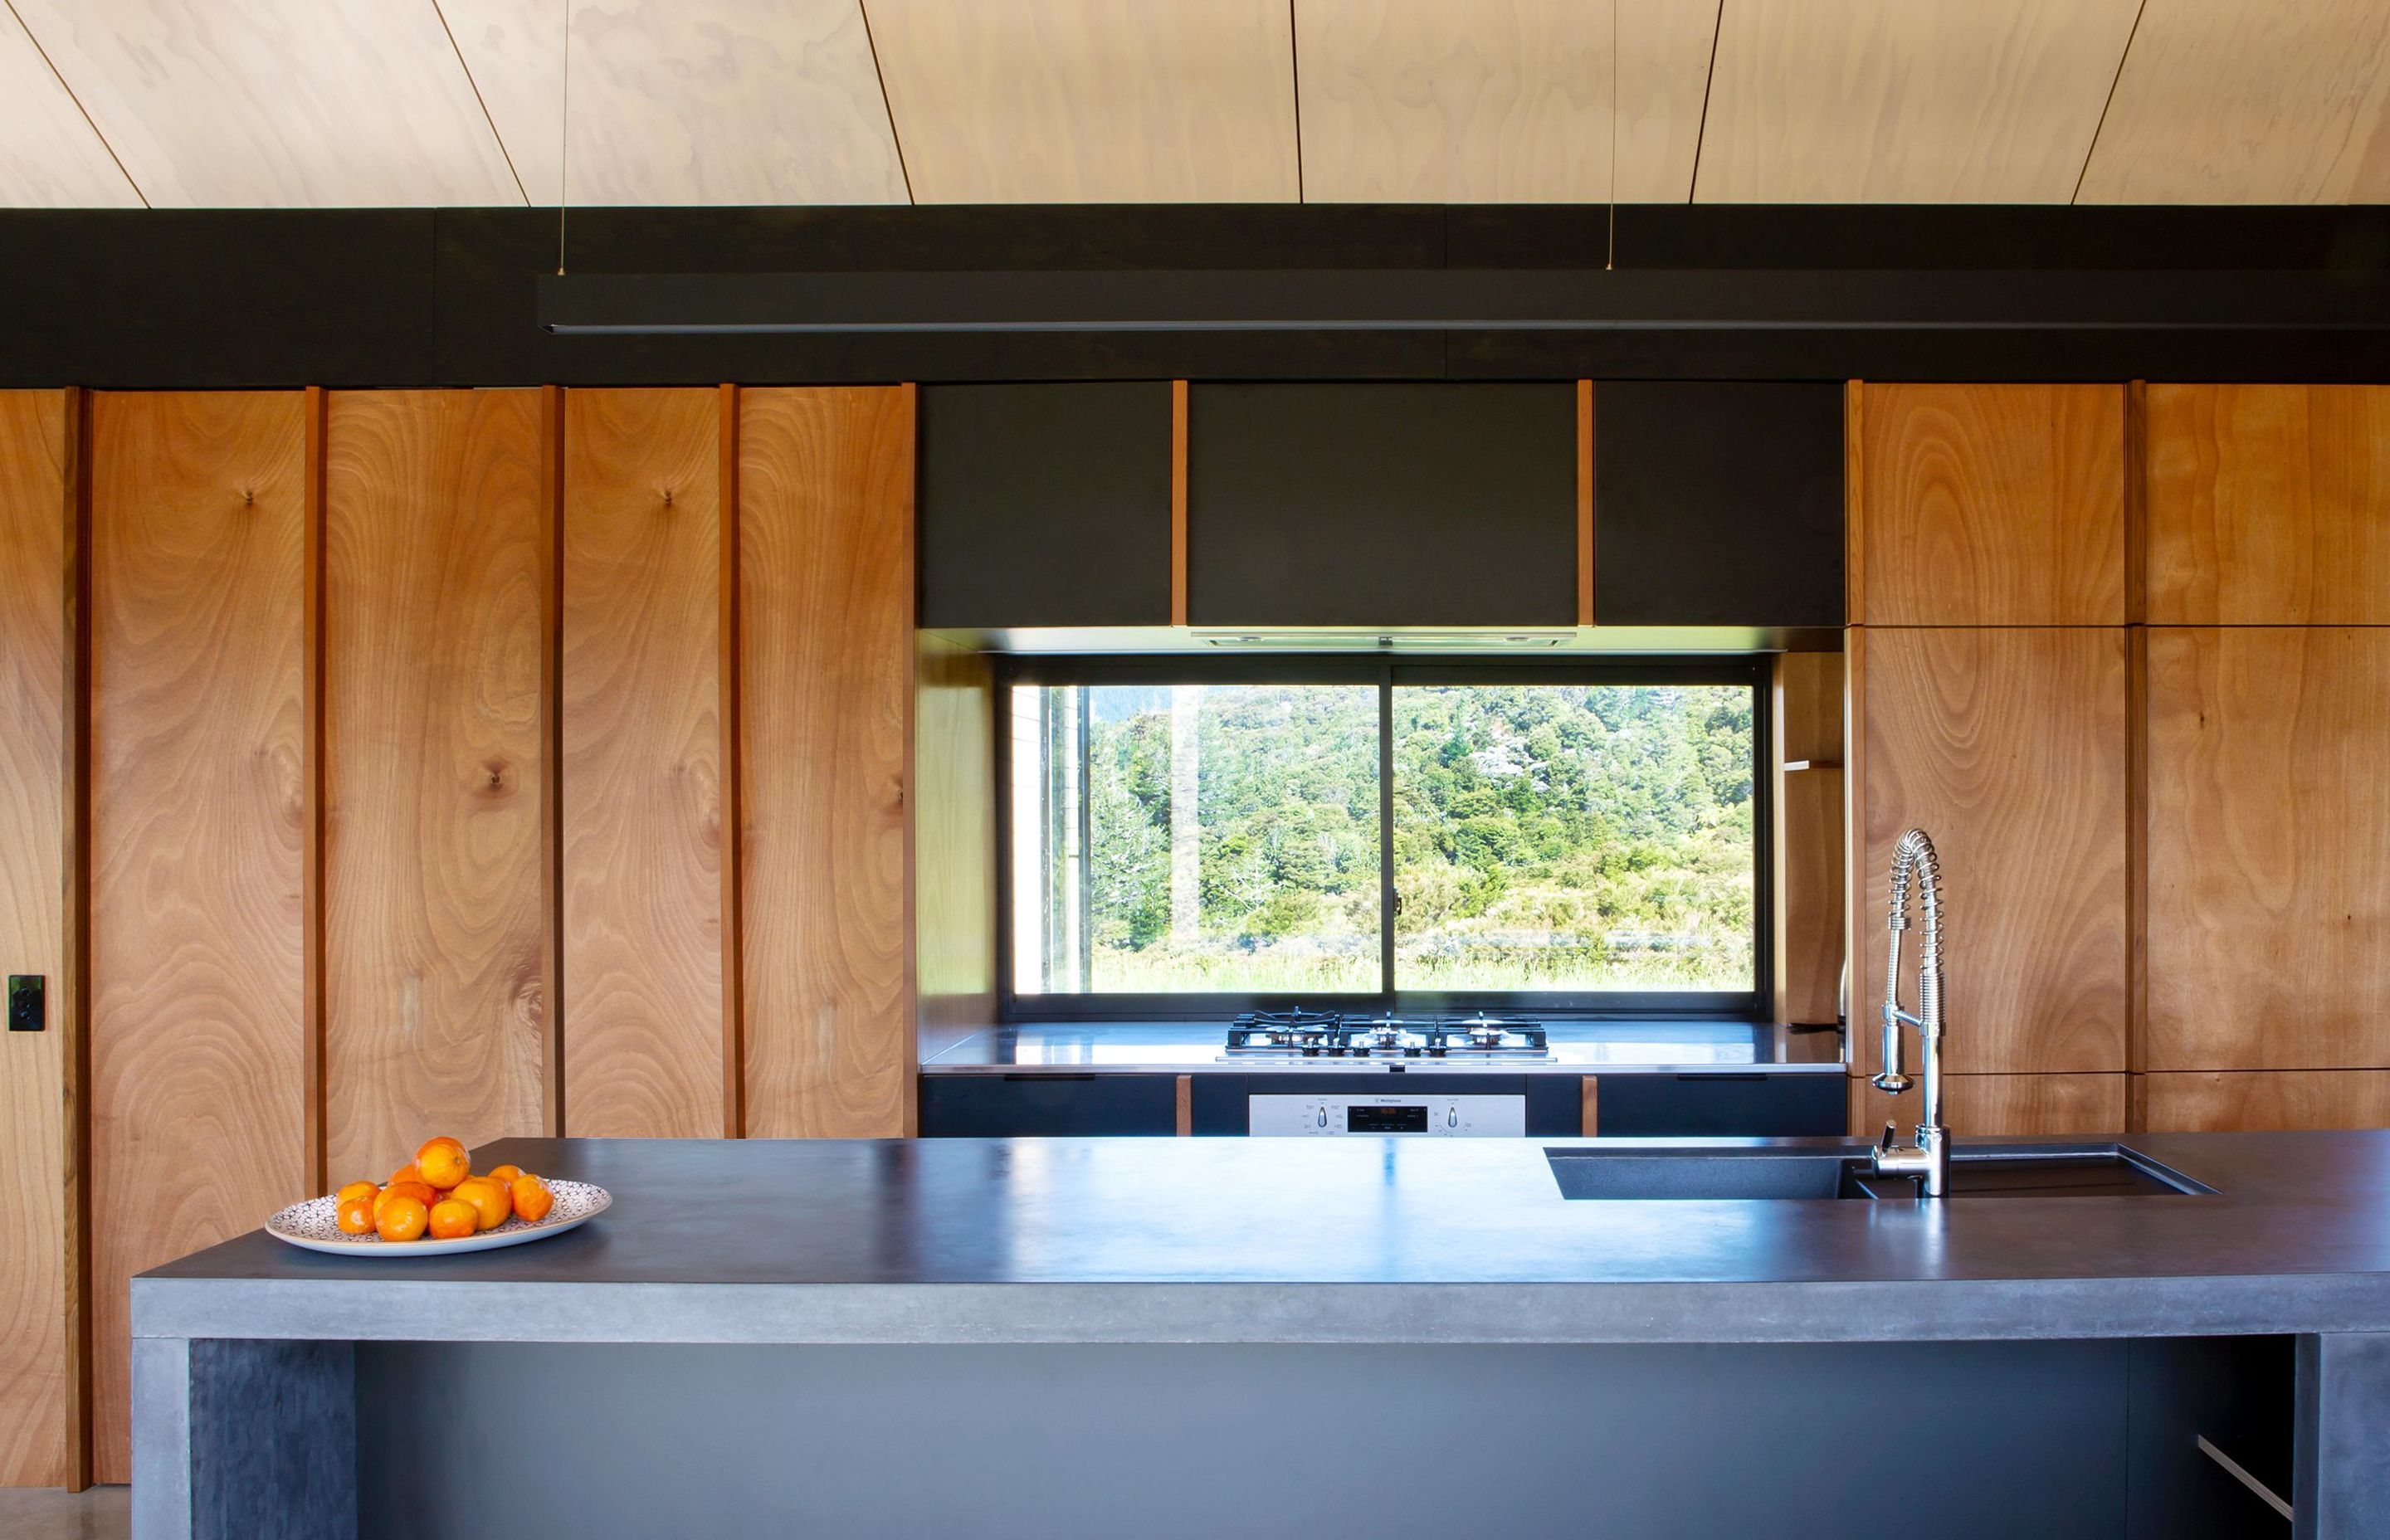 Simple functionality and natural, durable materials were specified for the kitchen. 